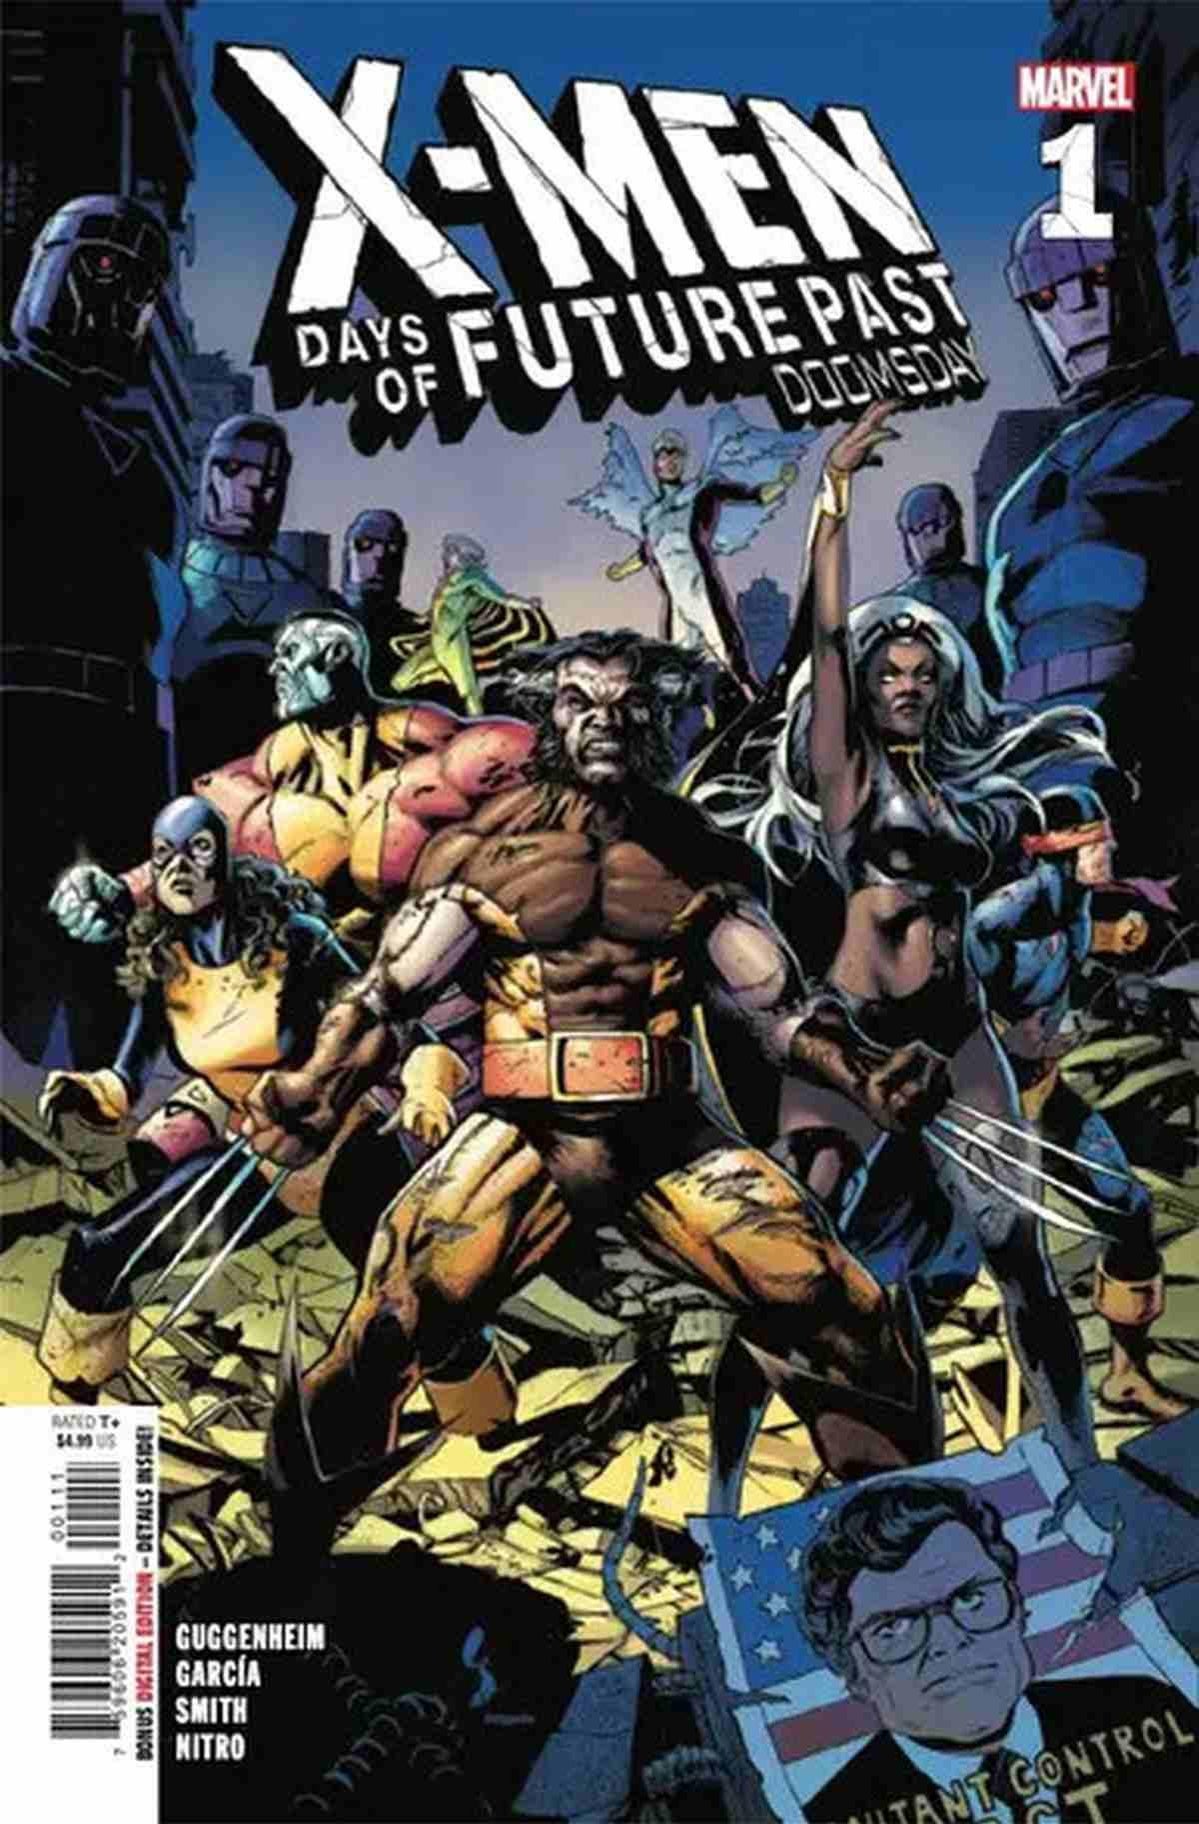 x-men-days-of-future-past-doomsday-1-cover.jpg